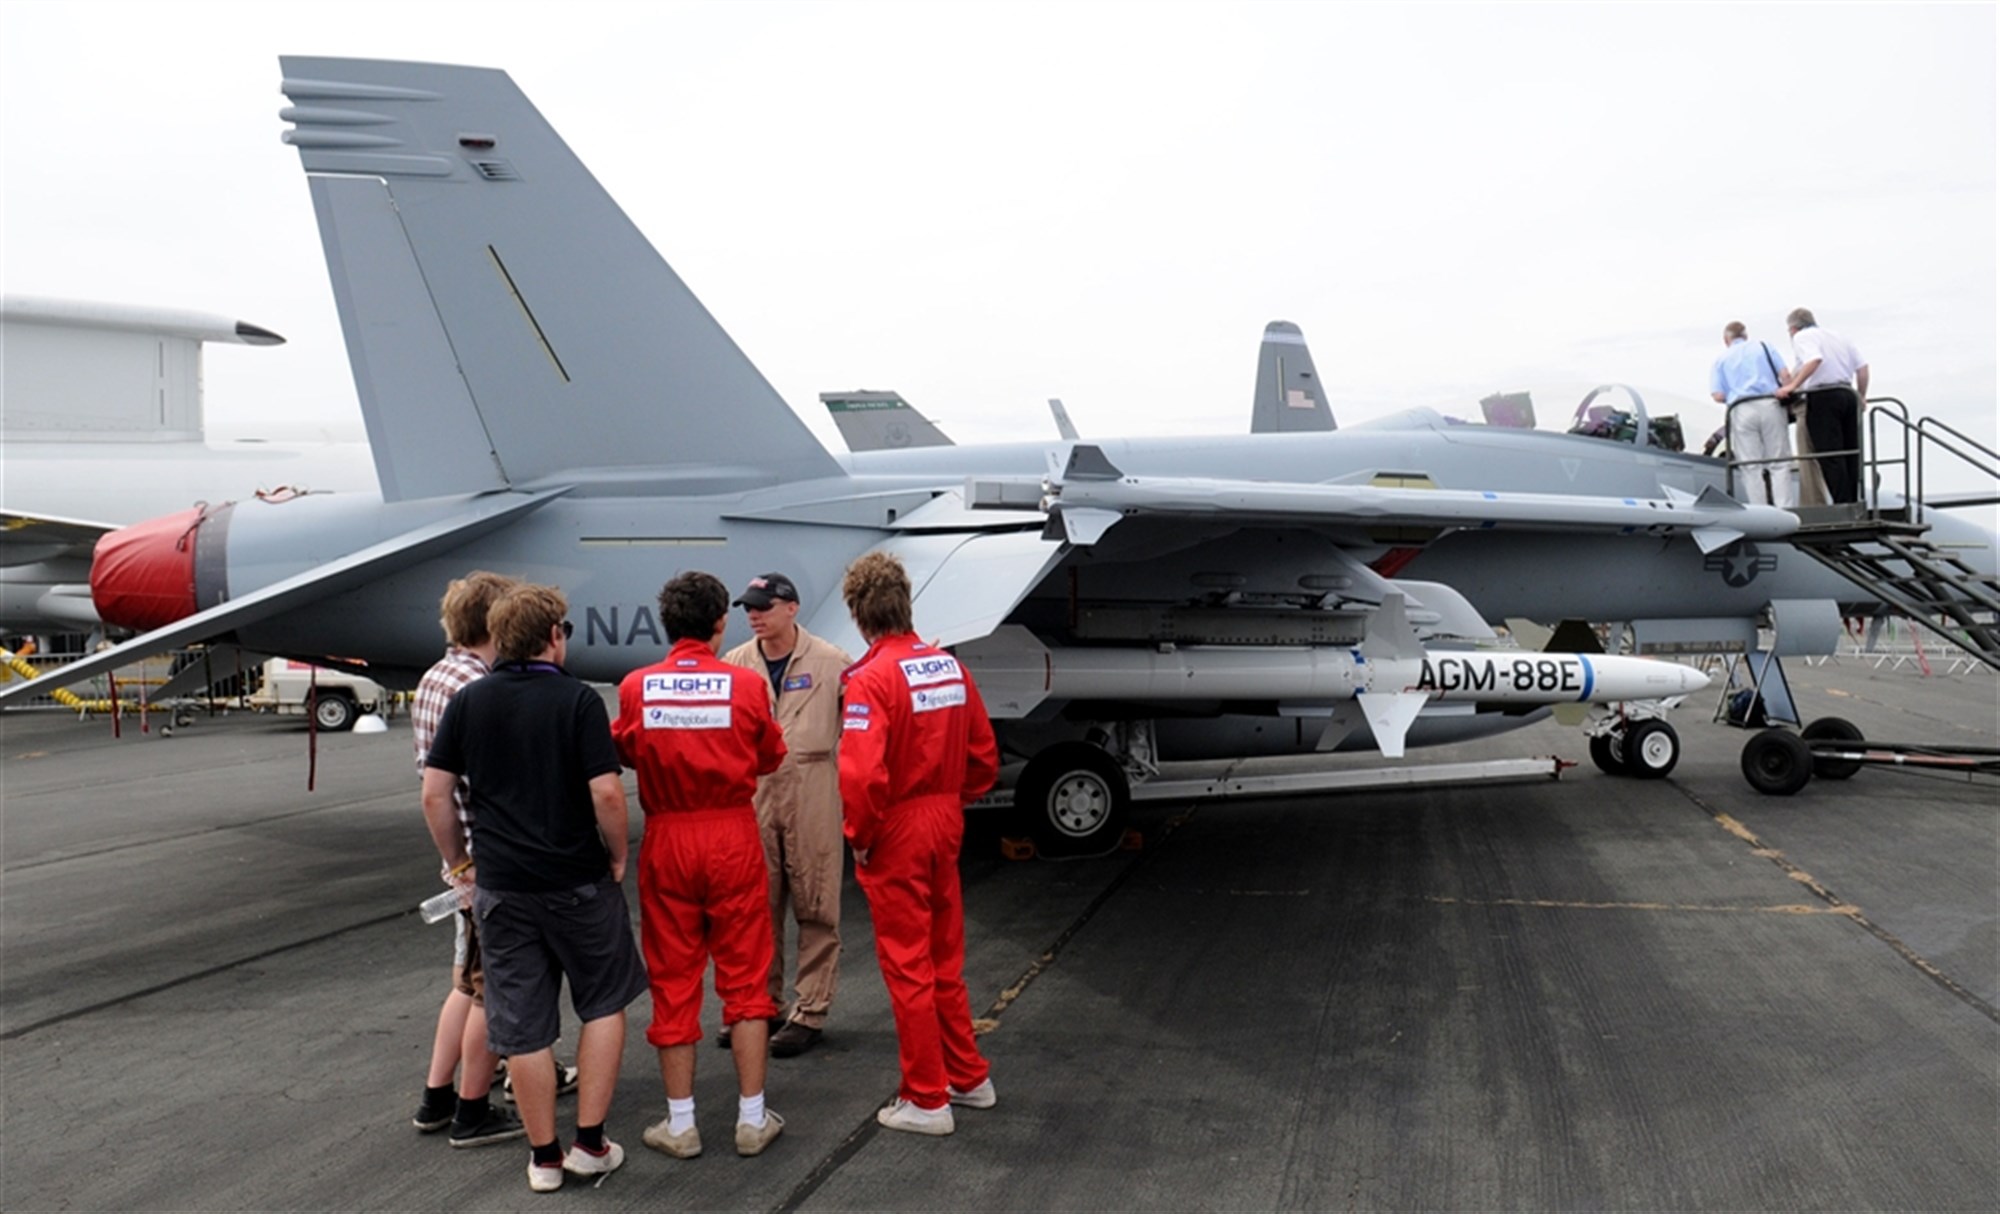 FARNBOROUGH, United Kingdom &mdash; Navy Lt. Ray Bieze, F/A-18F pilot, Air Test and Evaluation Squadron Two Three, Naval Air Station Patuxent River, Md. tours a group of aviation enthusiasts around an F/A-18F Super Hornet during the Farnborough International Air Show July 20. Lieutenant Bieze explained the different areas around the aircraft and capabilities of the Super Hornet to the group. (U.S. Air Force photo by Staff Sgt. Jerry Fleshman)